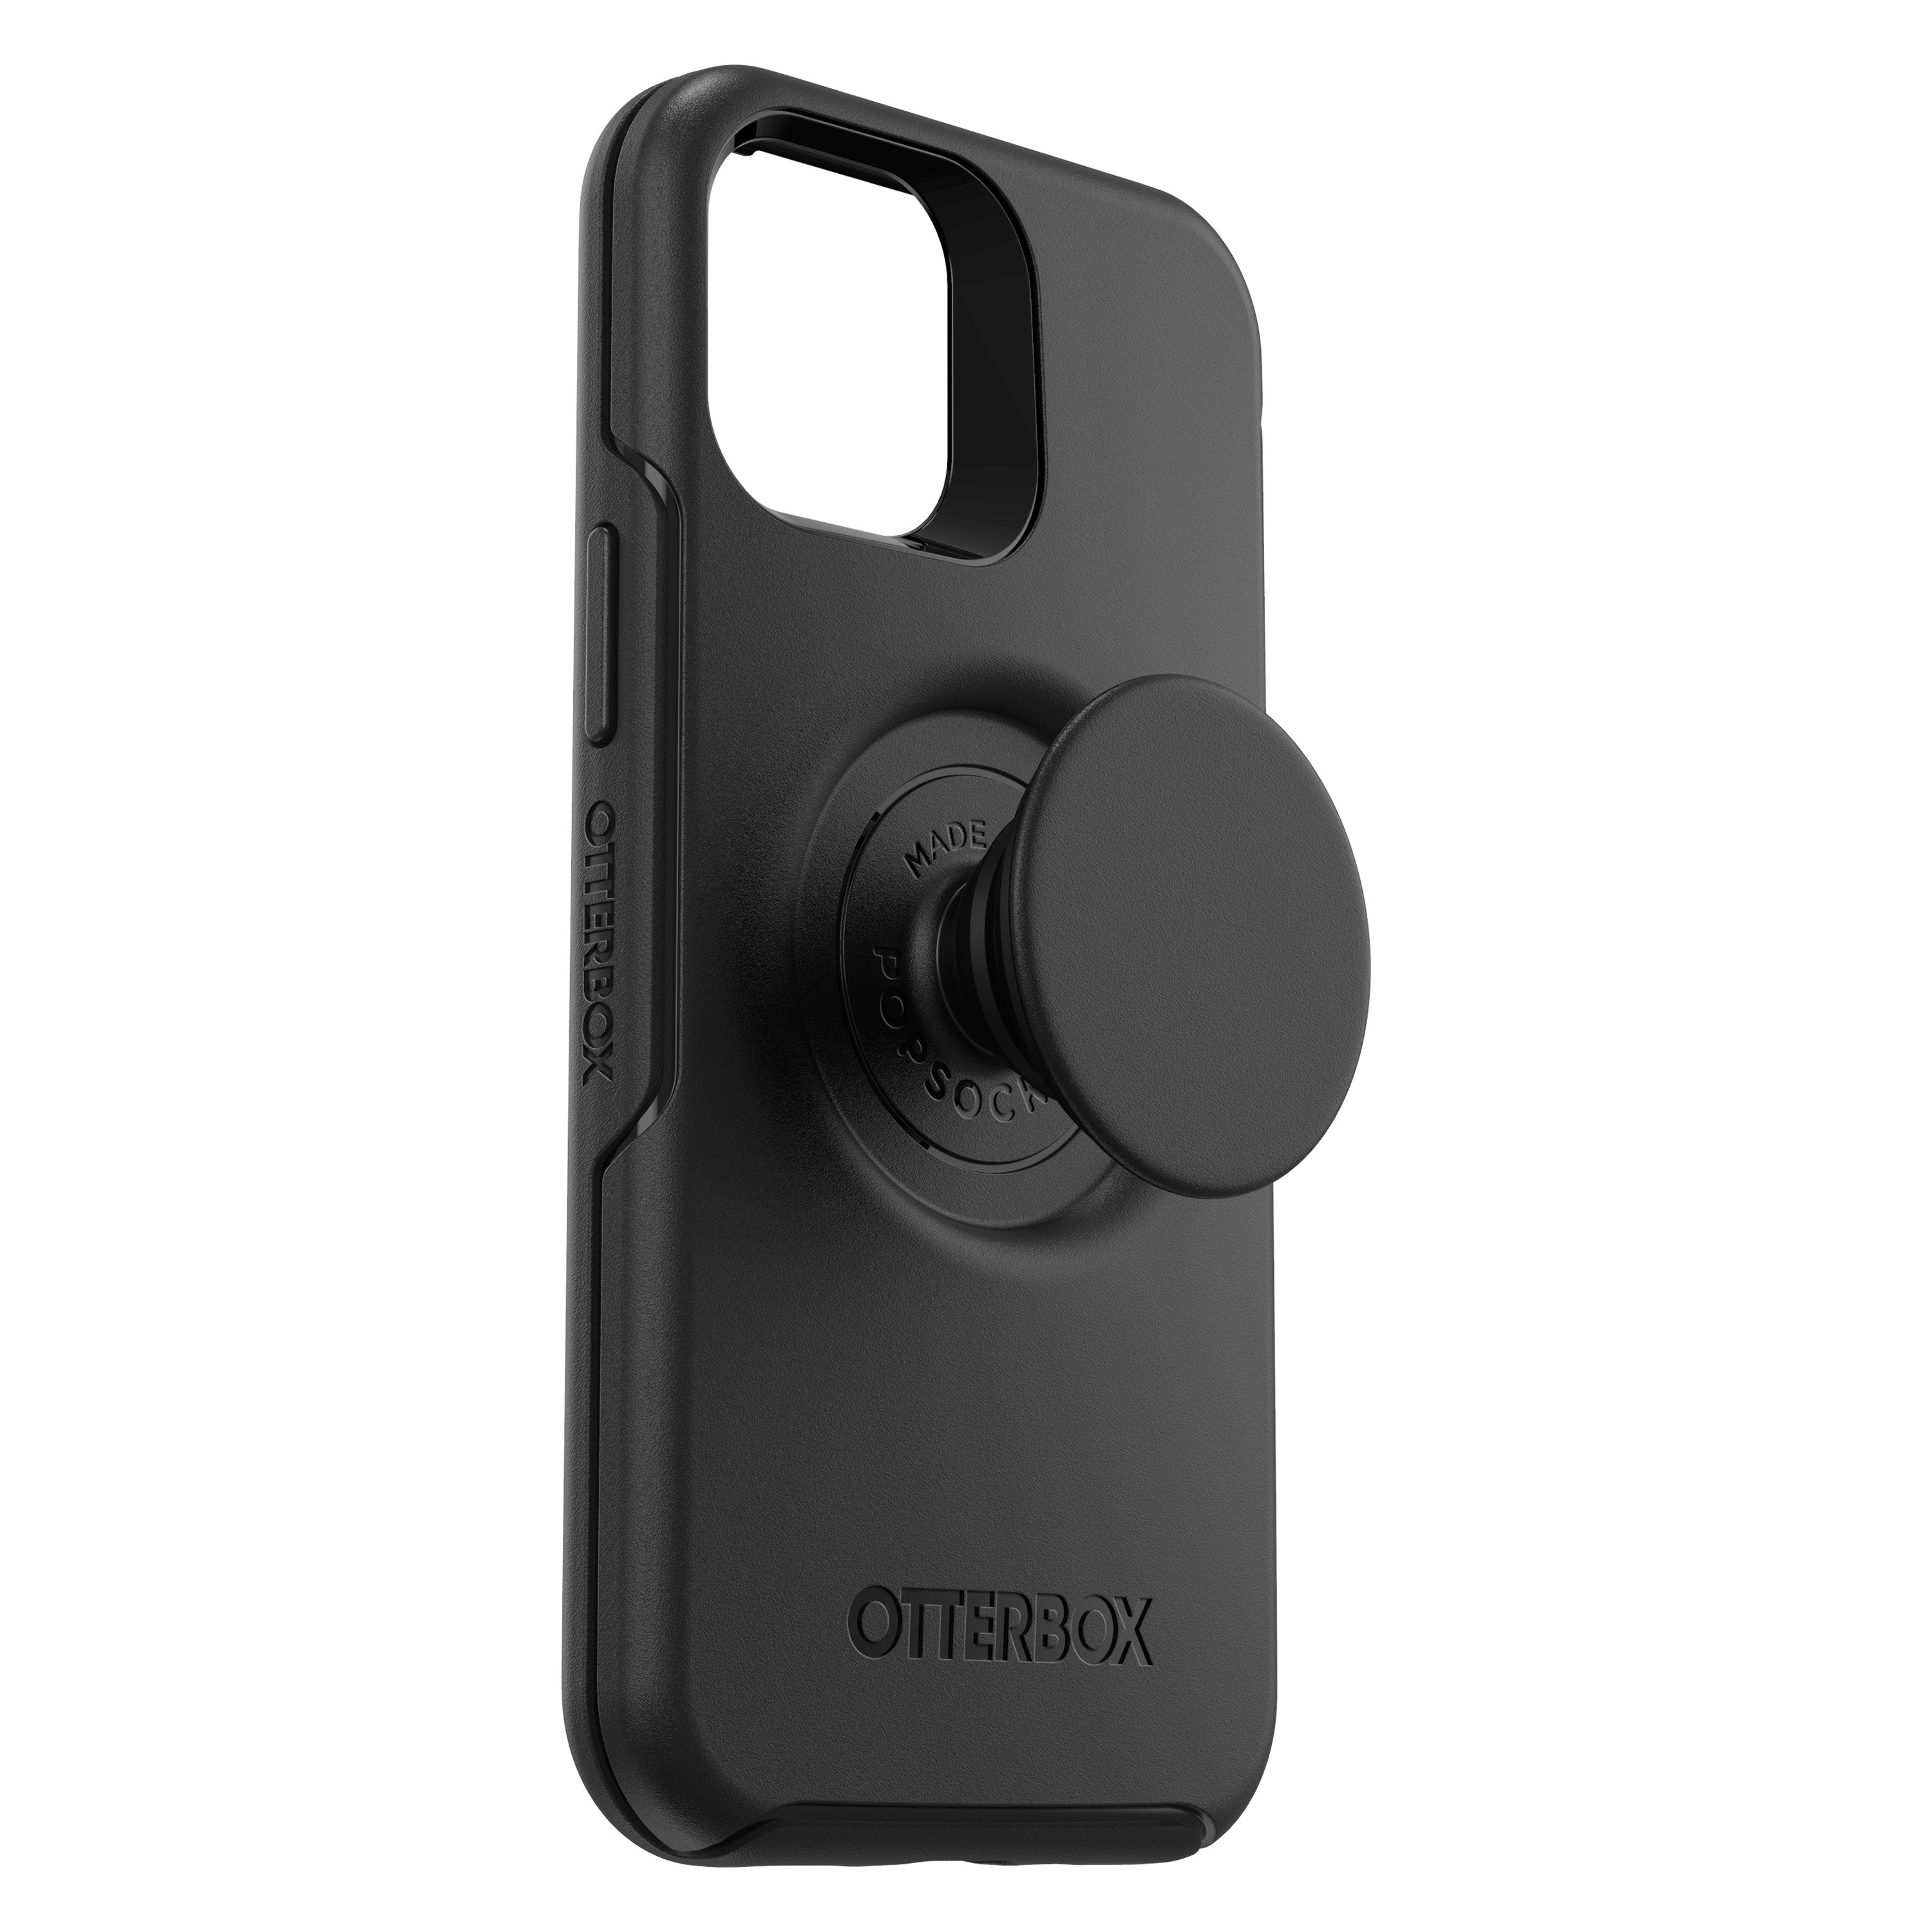 OtterBox OTTER+POP SYMMETRY Apple iPhone 12 Mini case - Drop Protection Cover w/ PopSocket Phone Holder, Slim Protective Selfie Case, Wireless Charging Compatible - Black